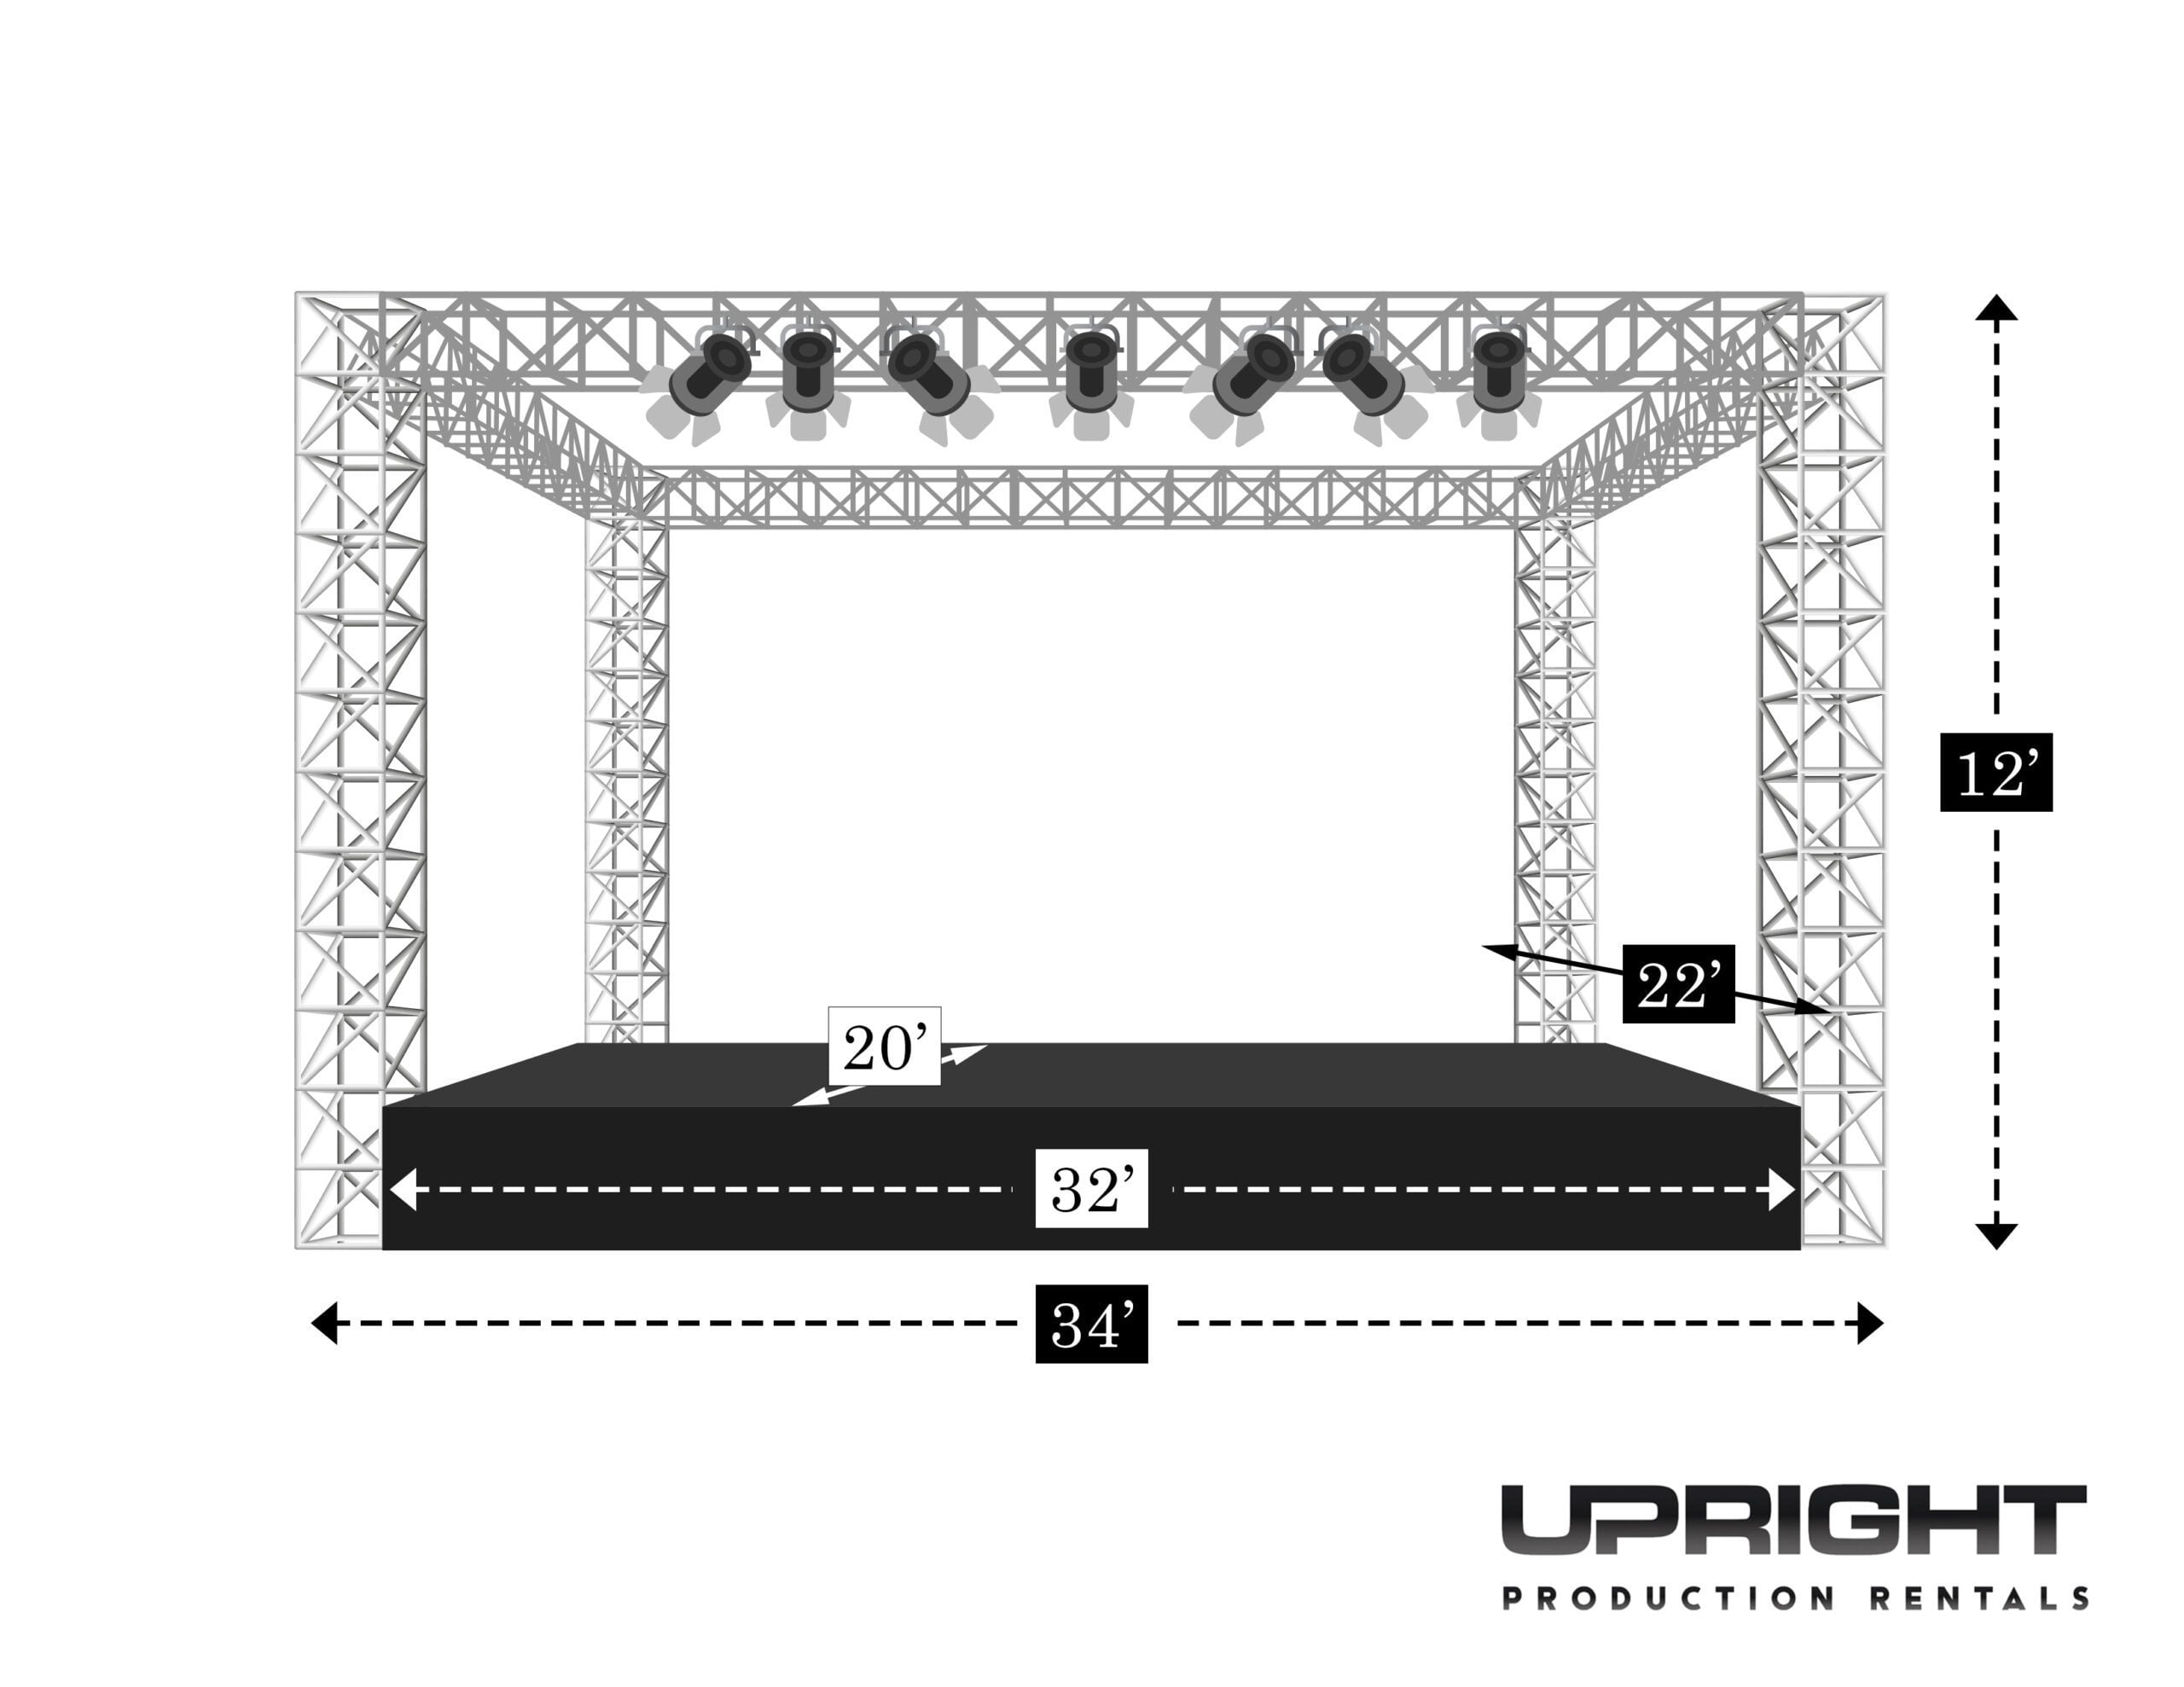 Truss structure stage 34 * 22 * 12